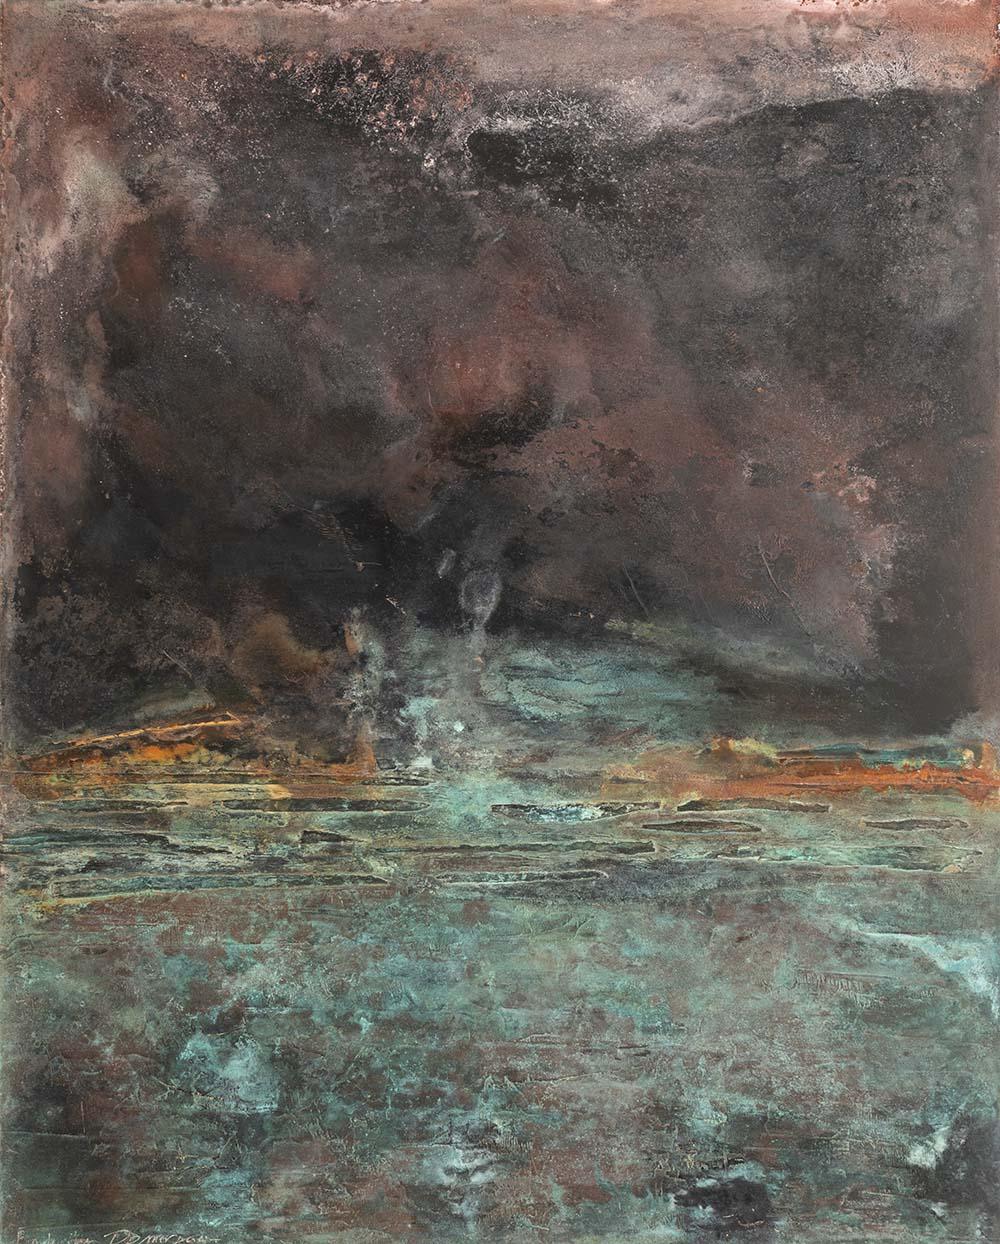 Surfacing is a unique painting by French contemporary artist Frédérique Domergue. This painting is made with oxidized zinc and bronze leaves on aluminium panel, patina fixed with beeswax, dimensions are 100 × 80 cm (39.4 × 31.5 in).
The artwork is